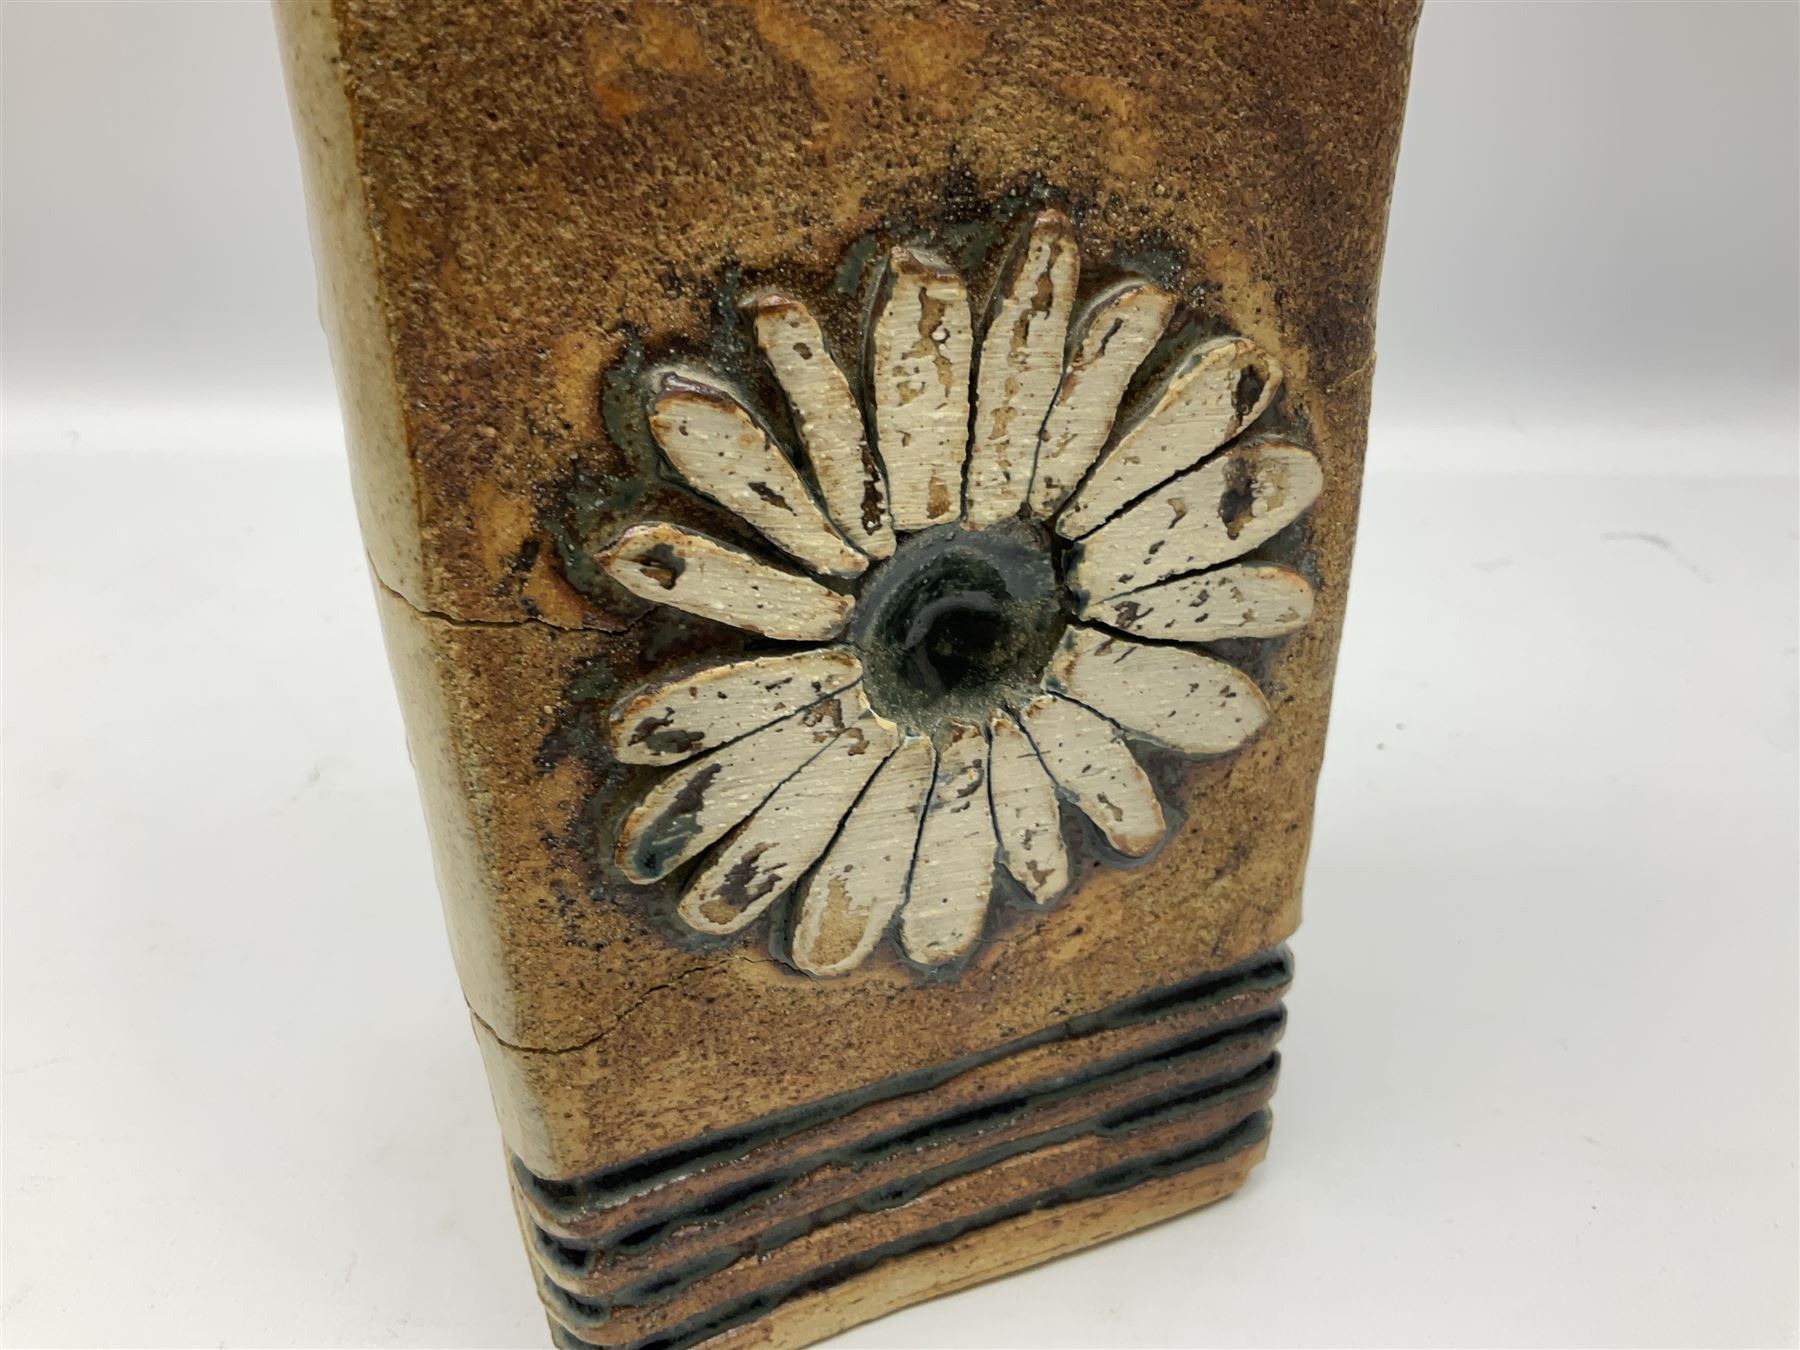 Studio pottery table lamp of slab built and moulded form with applied floral and abstract motifs - Image 4 of 9